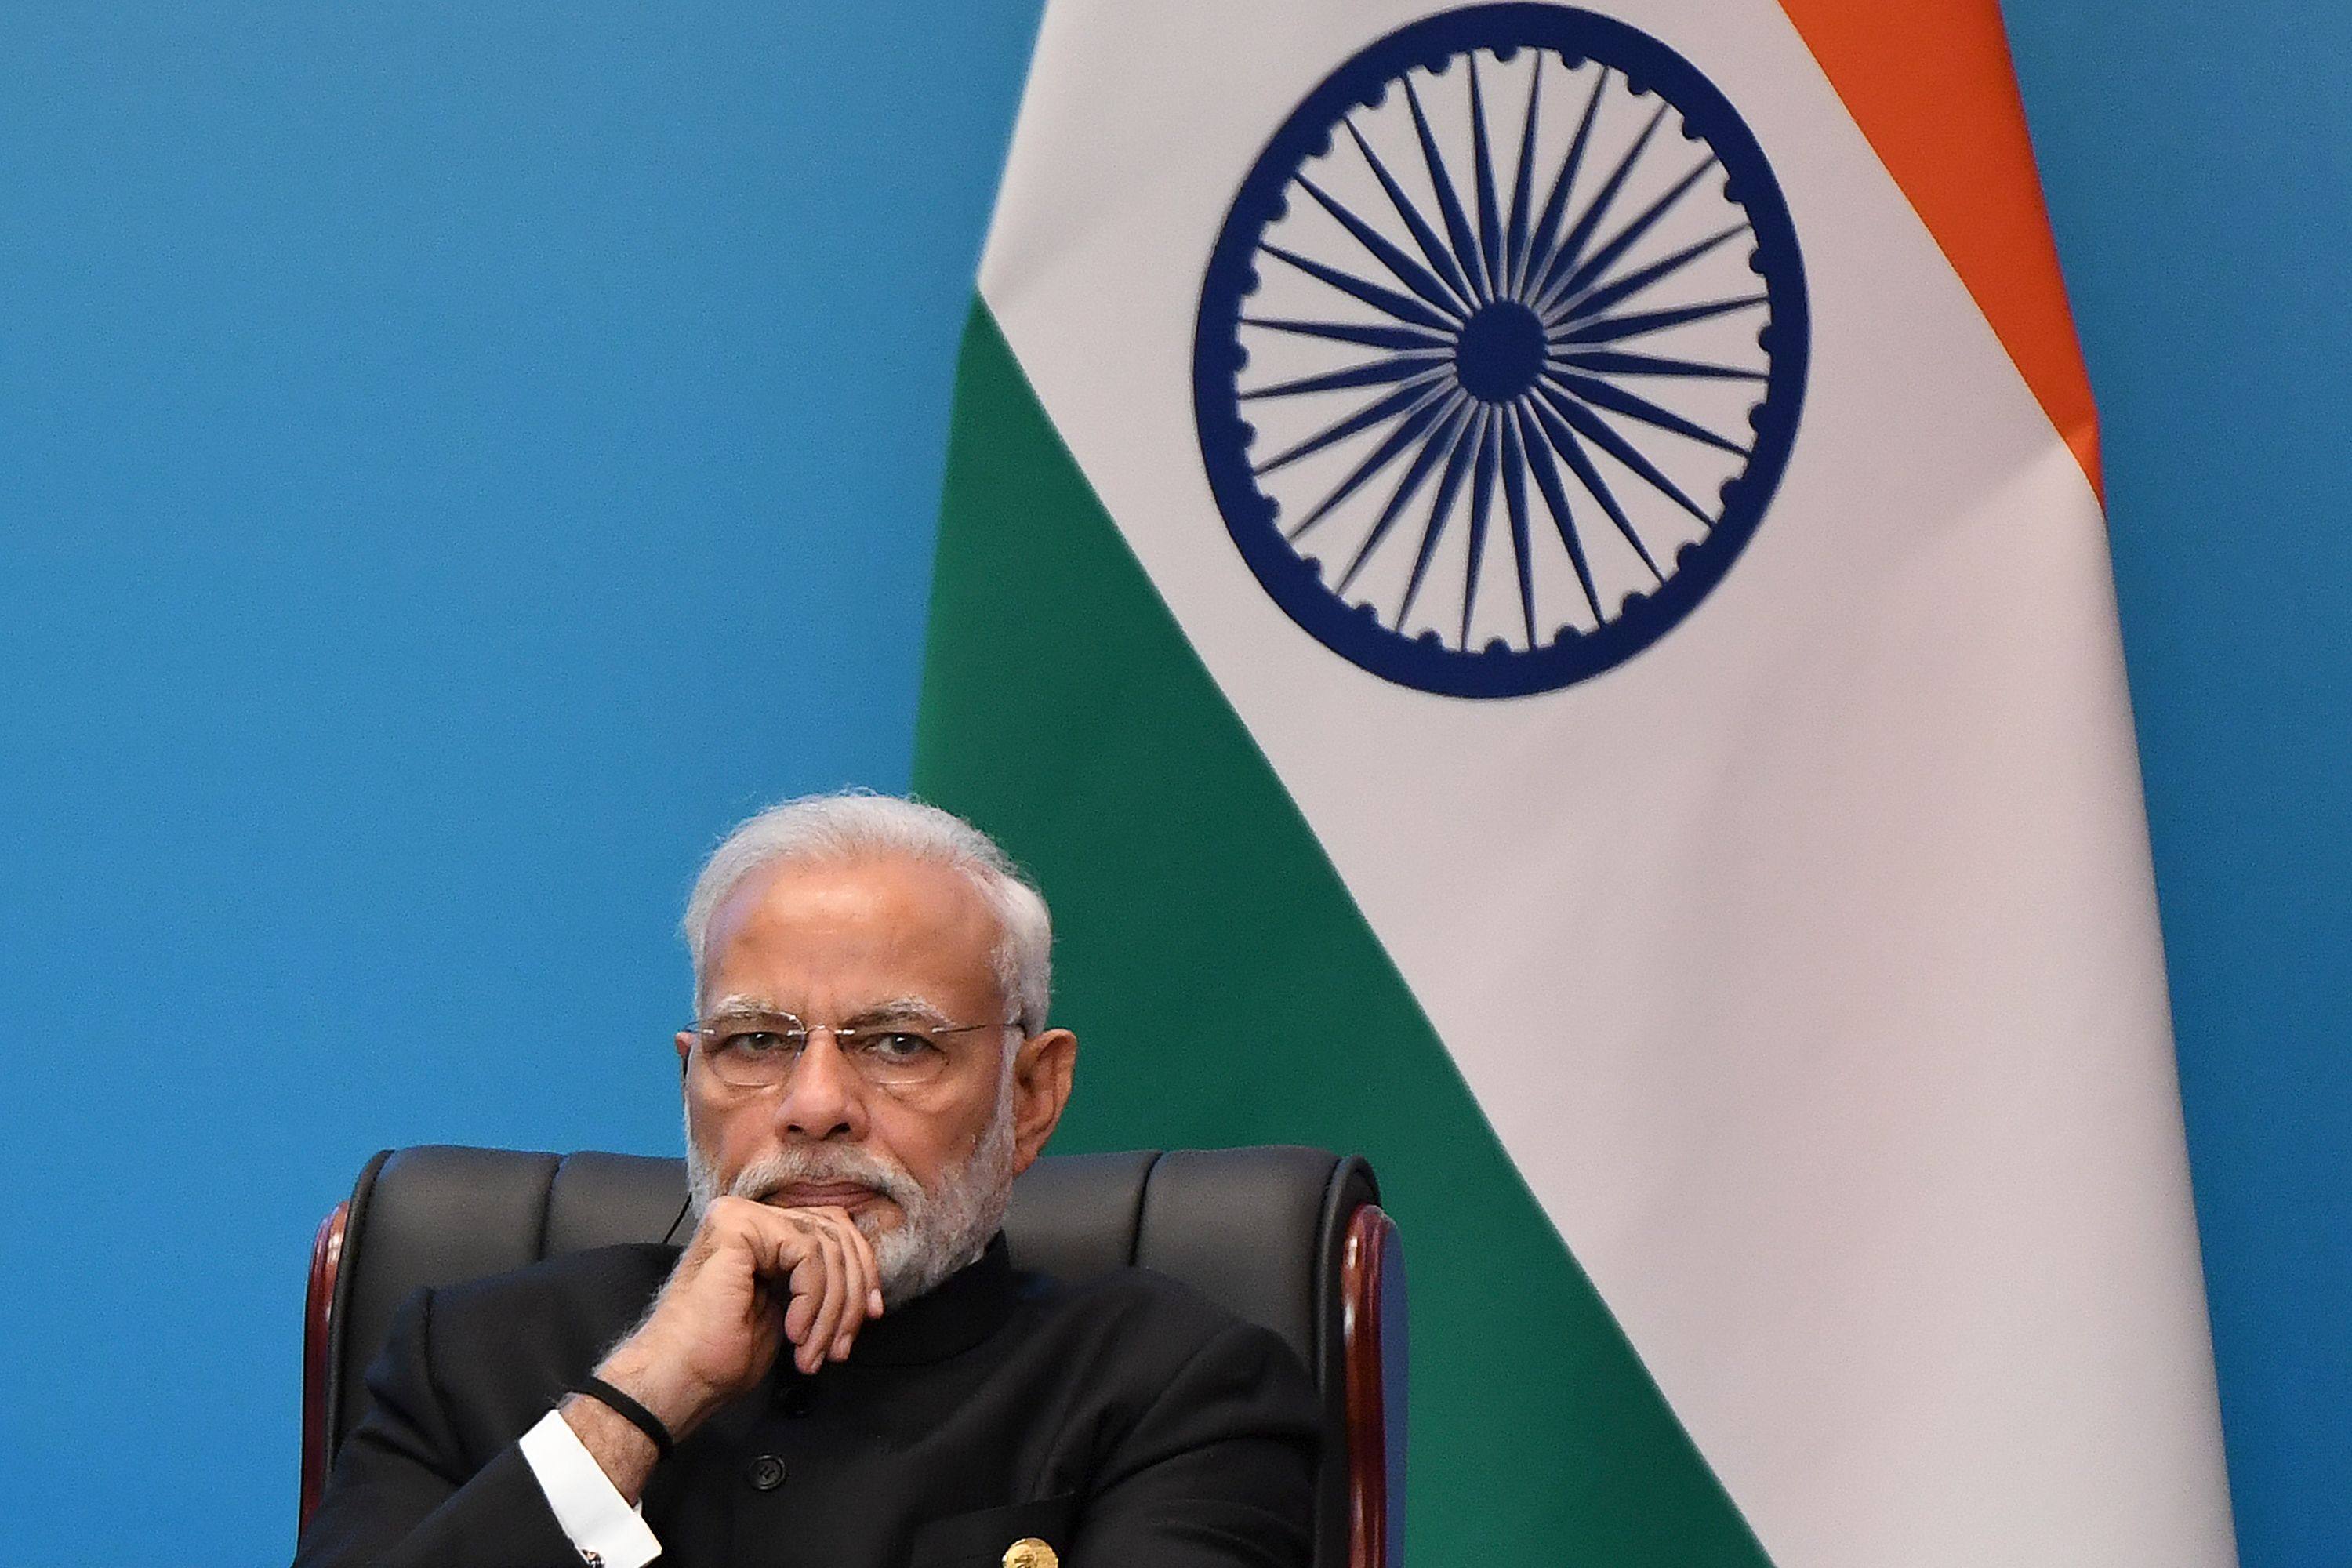 Indian Prime Minister Narendra Modi  at the 2018 Shanghai Cooperation Organisation (SCO) Summit in Qingdao, China. Photo: AFP